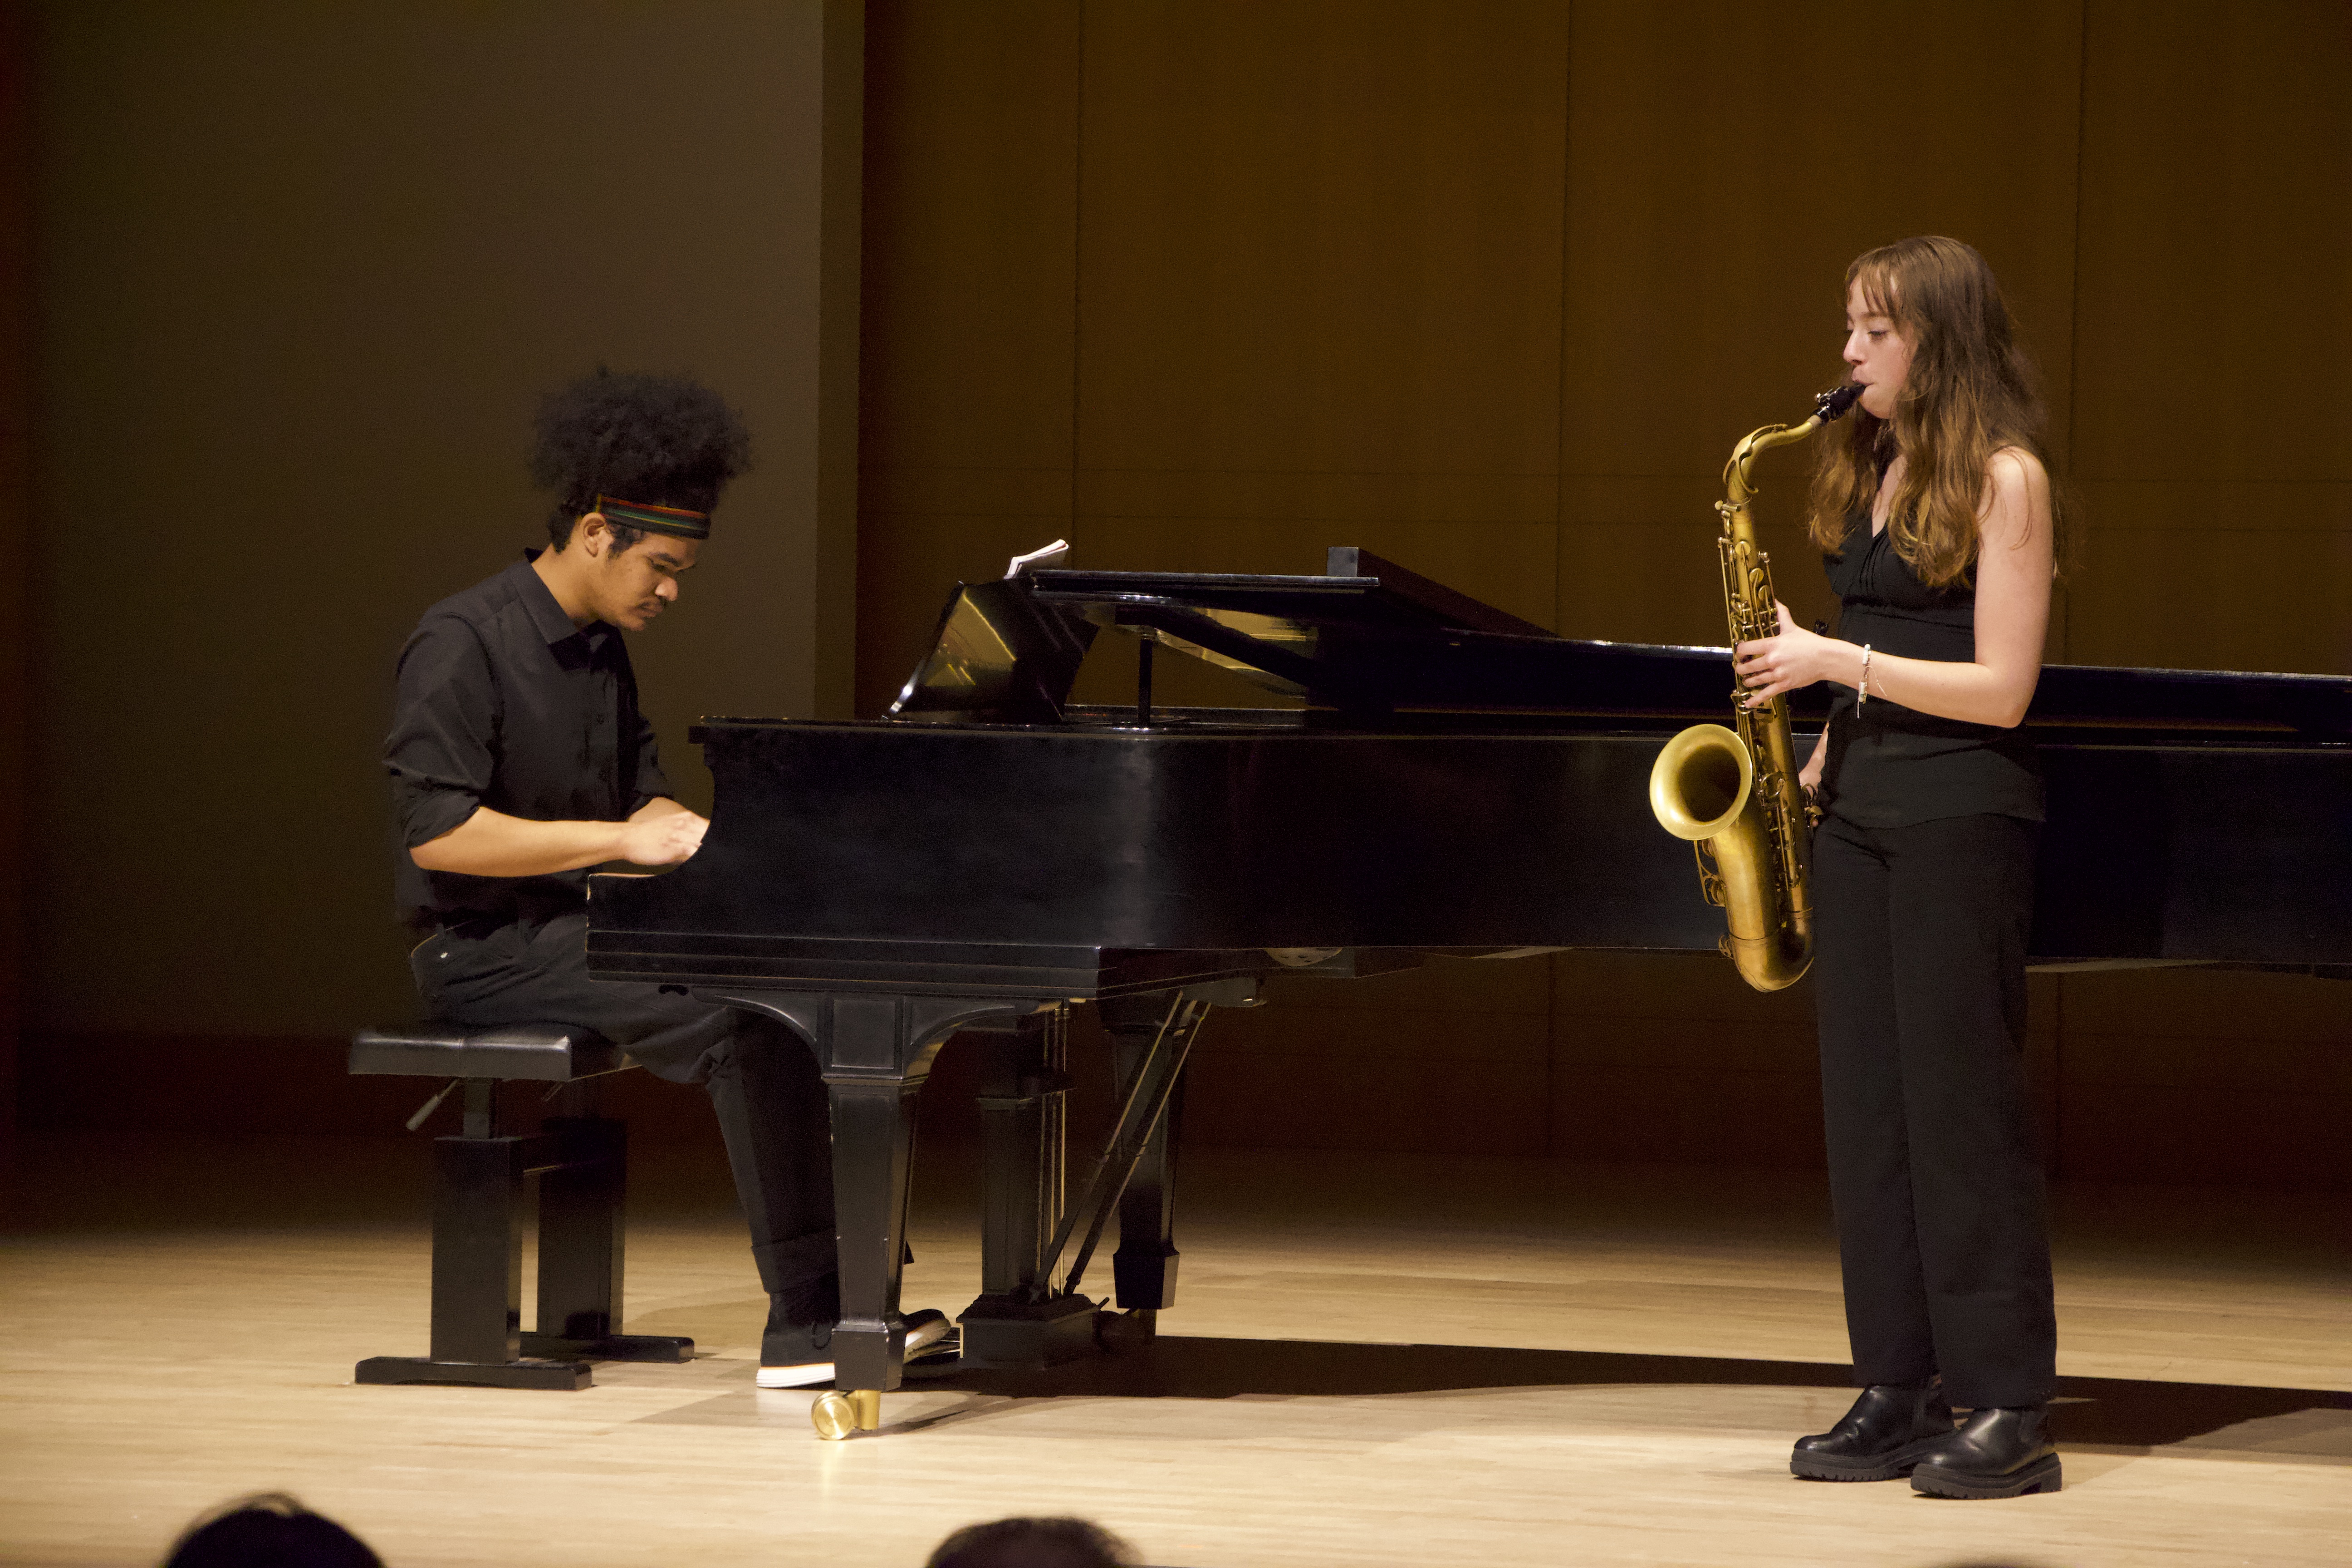 Pianist and saxophonist performing on Schroeder stage